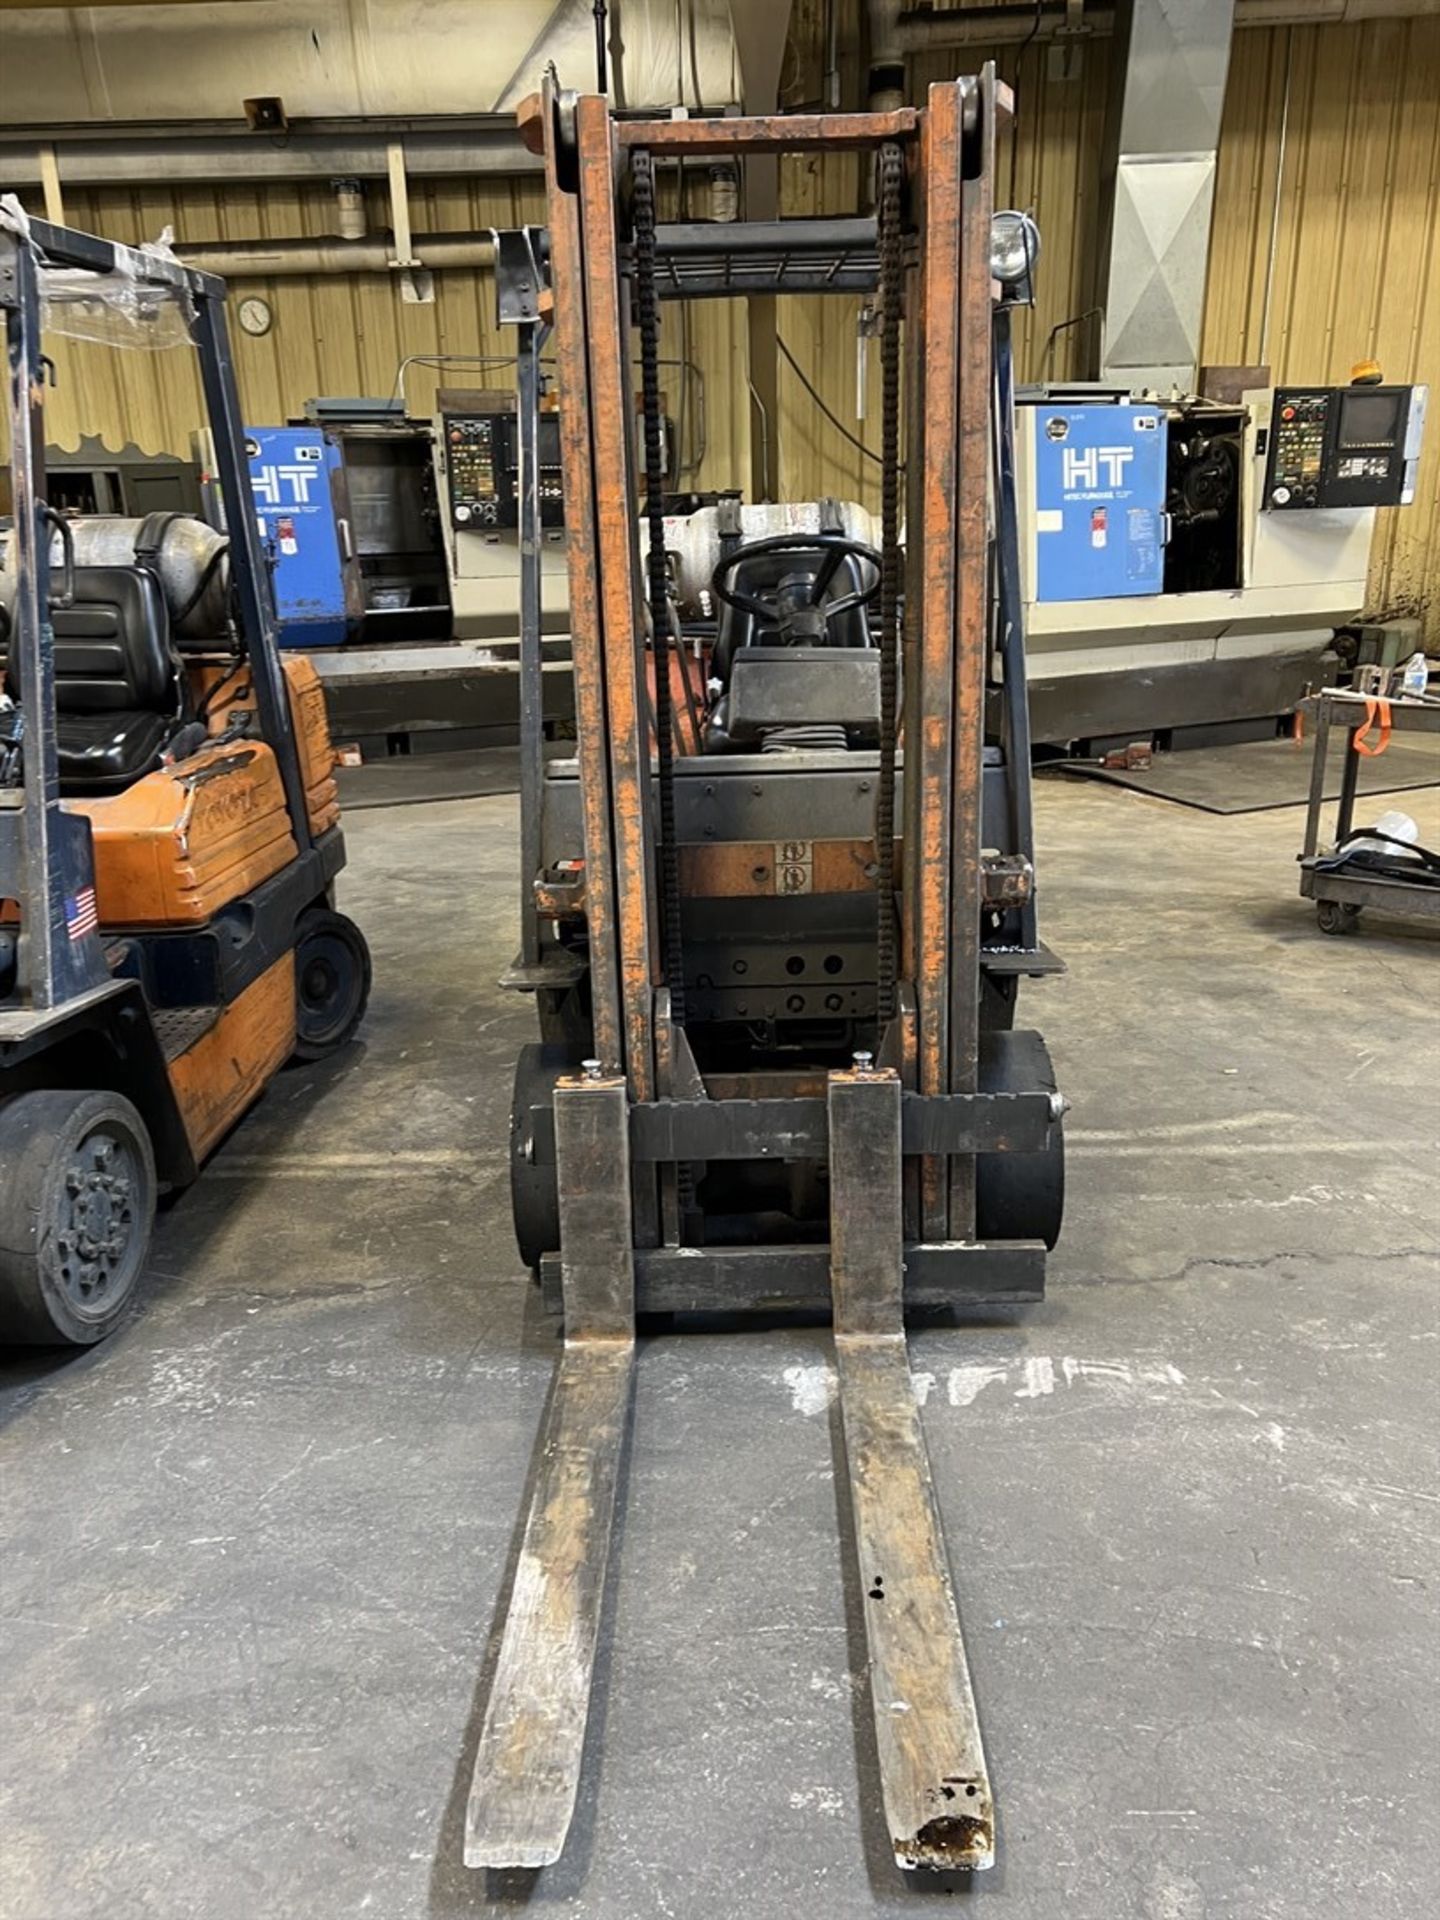 TOYOTA 5FHGC25 LP Forklift, s/n 5FGCU25-733, 5000 Lb Capacity, 2-Stage Mast, OH Protection ( - Image 2 of 10